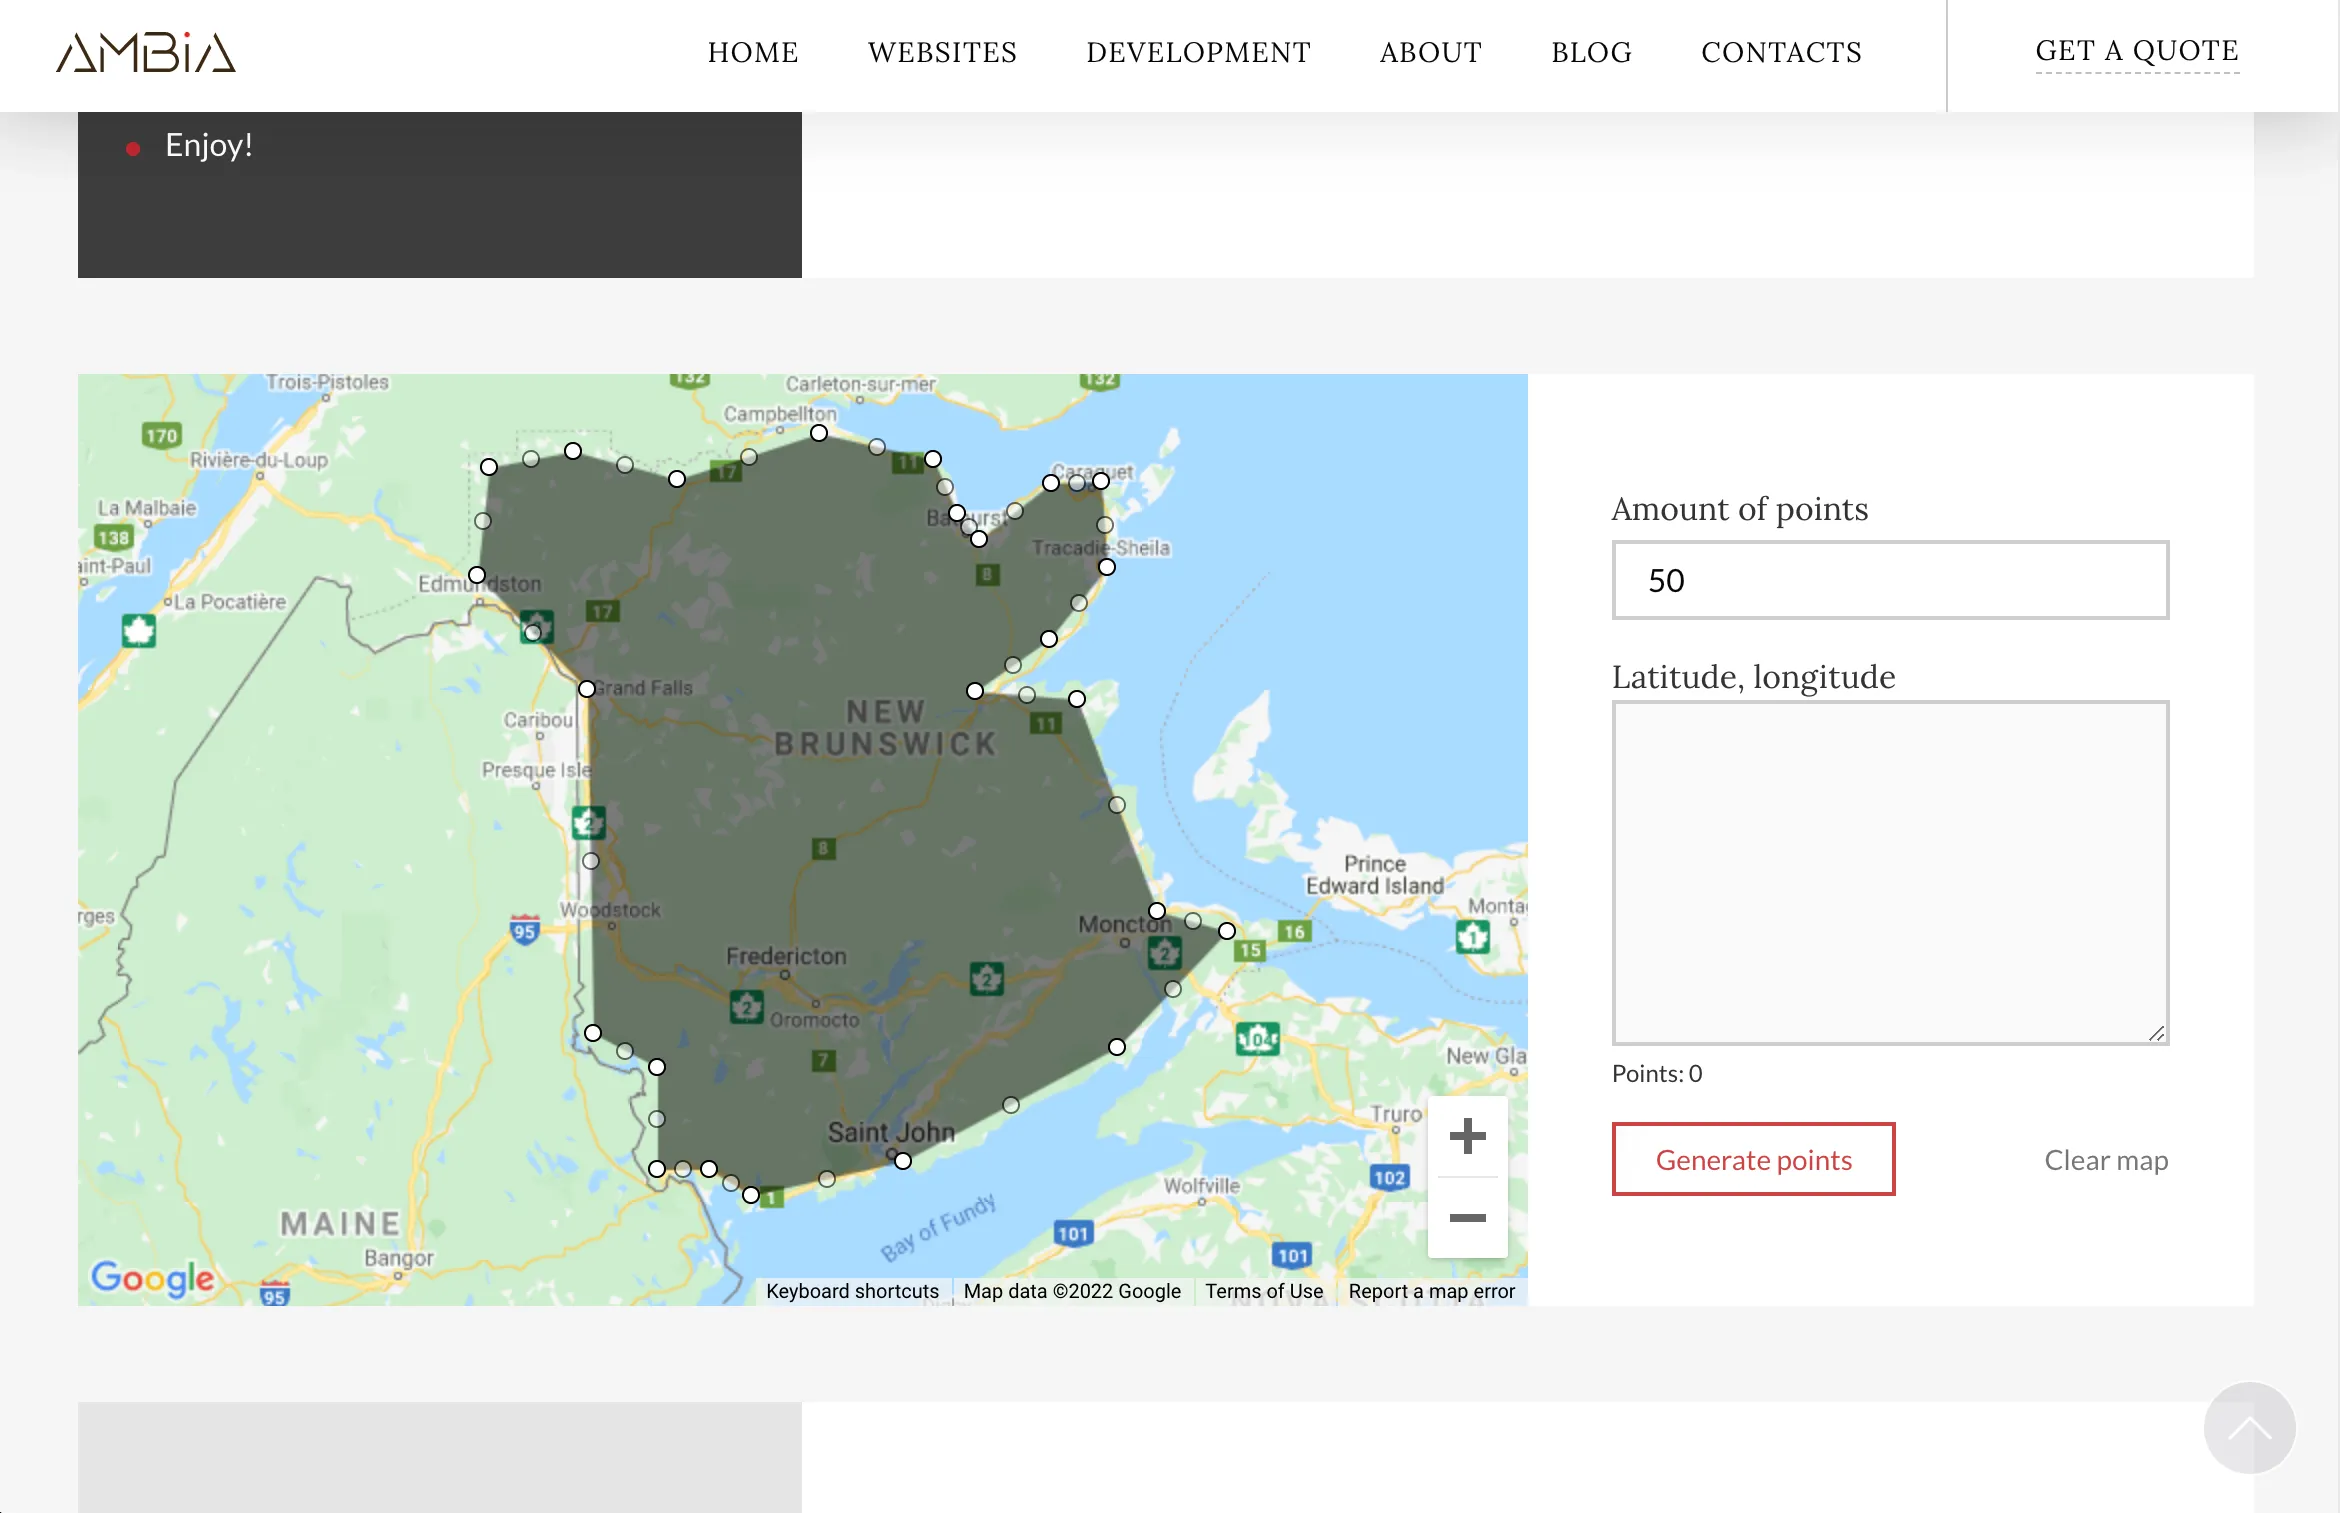 Selected polygon on the map